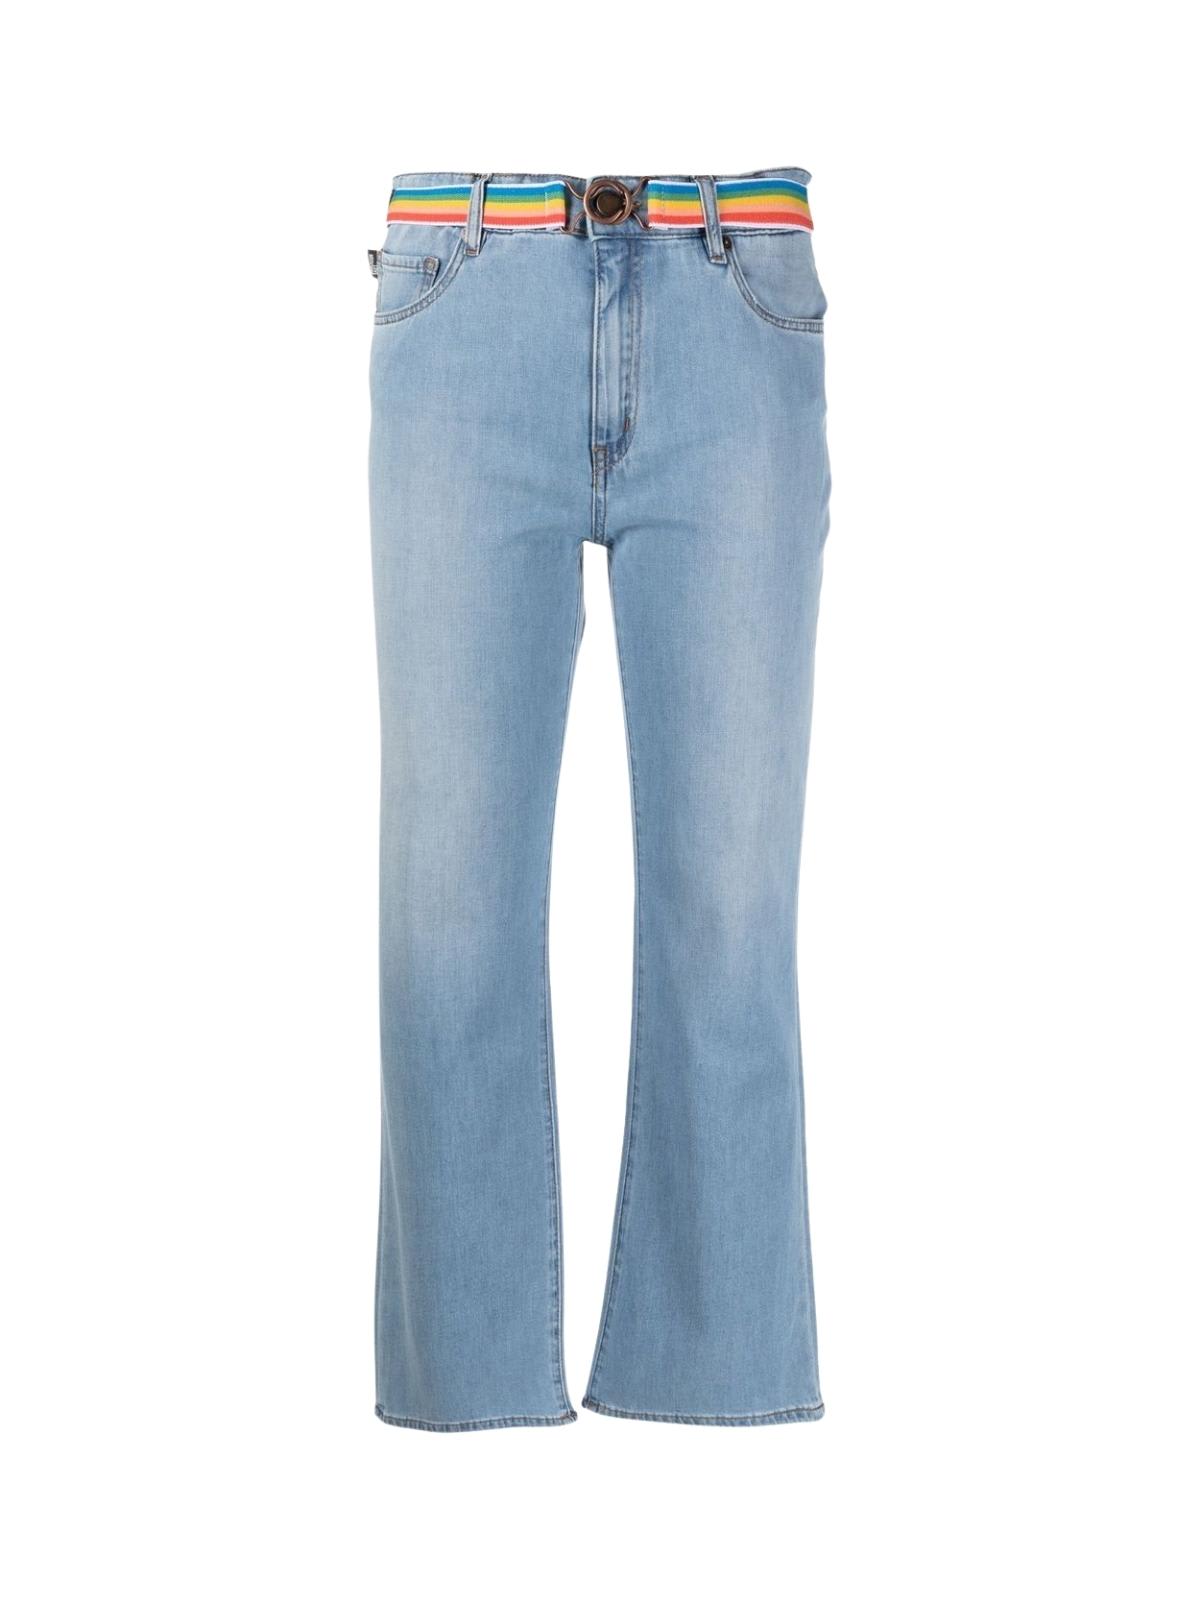 Love Moschino 5 Pockets Trousers With Rainbow Belt